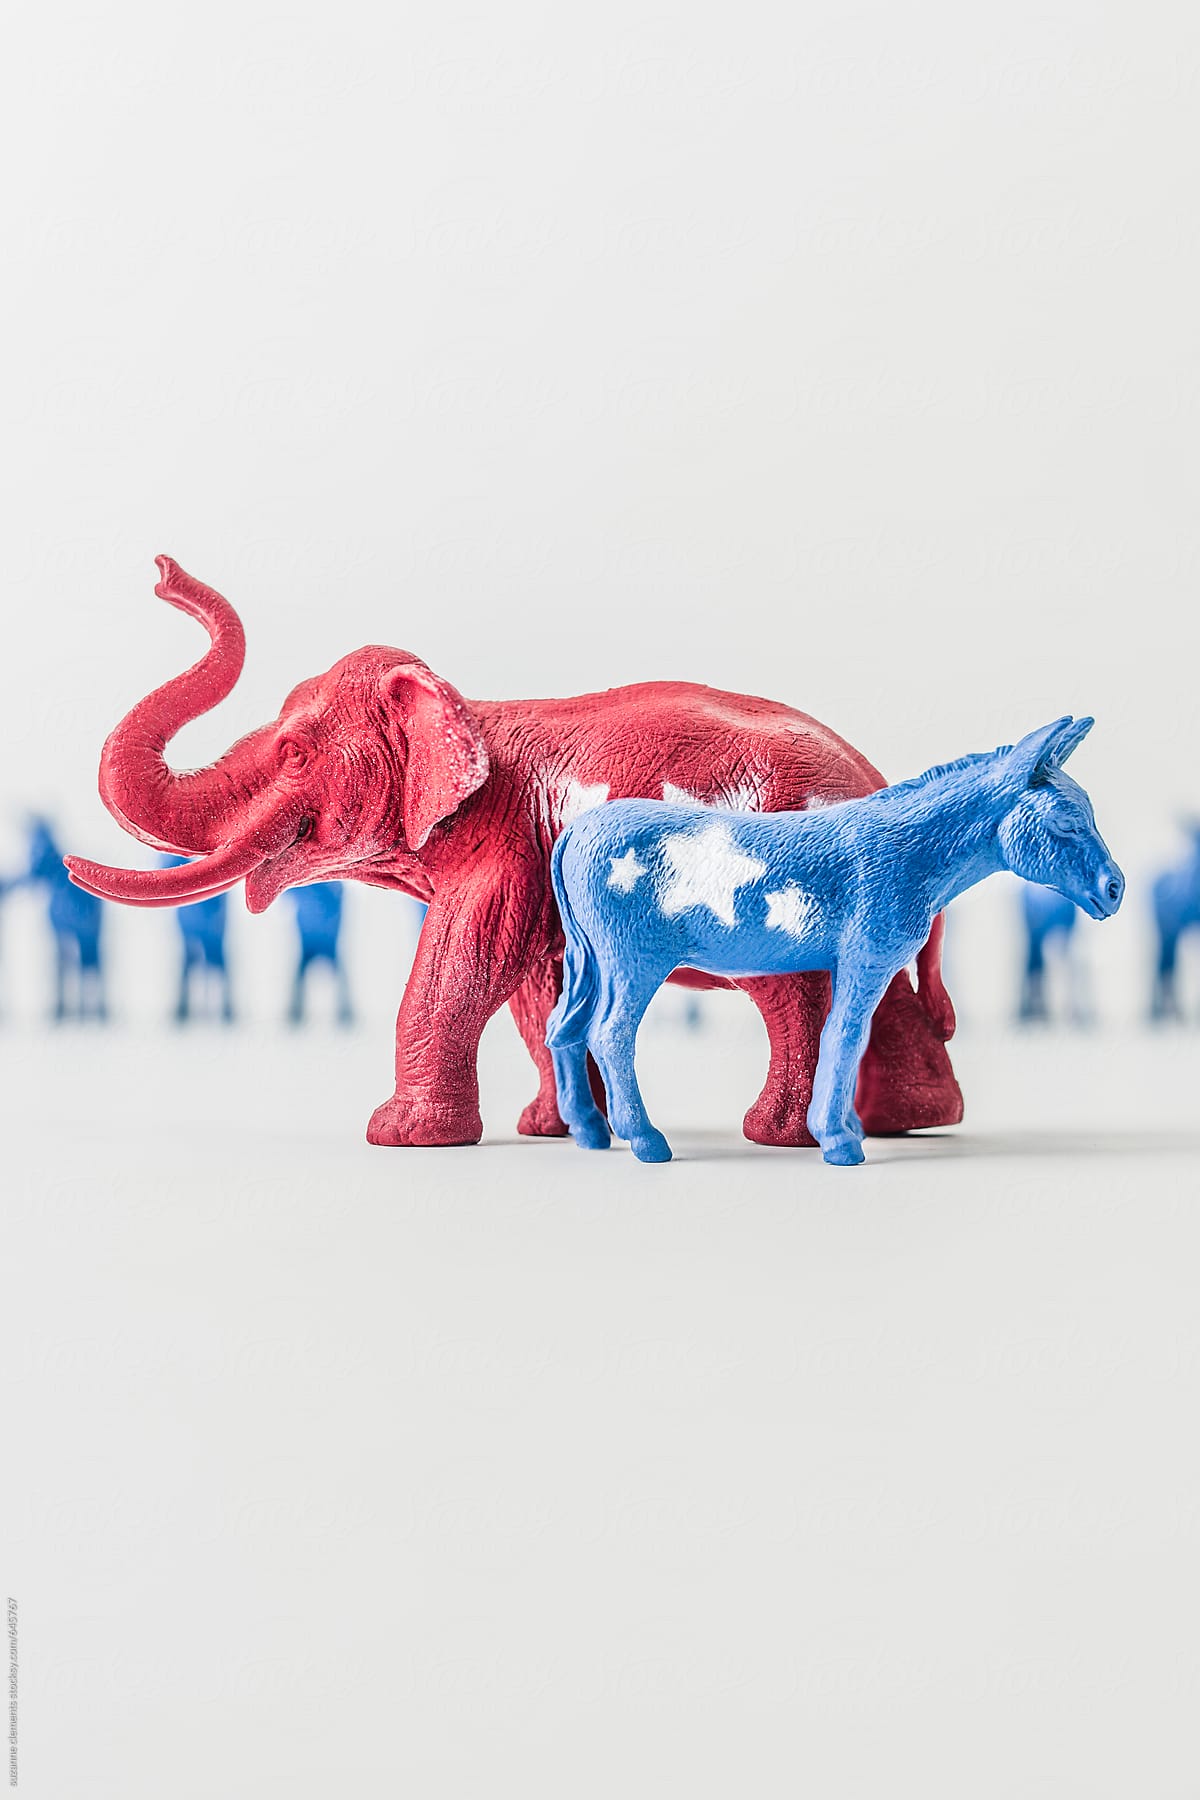 United States Democratic Donkey and Elephant Facing Away From Each Other